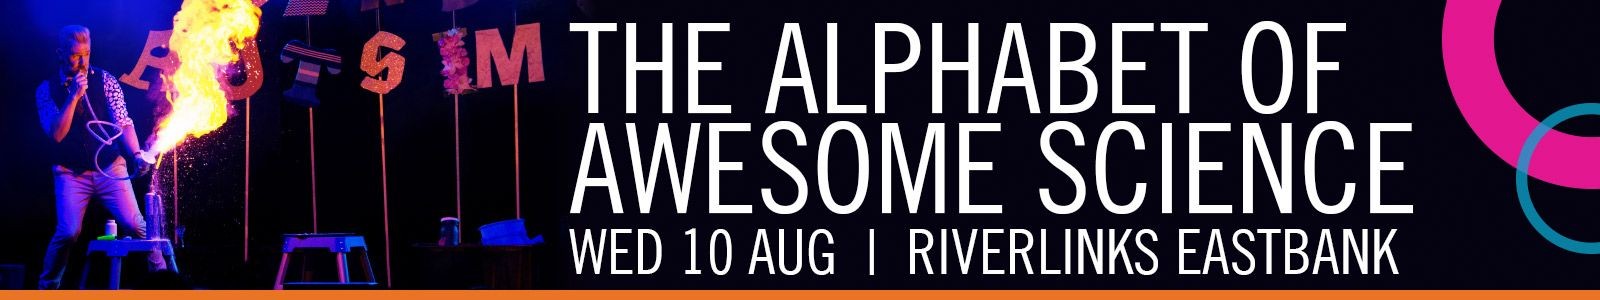 The Alphabet of Awesome Science